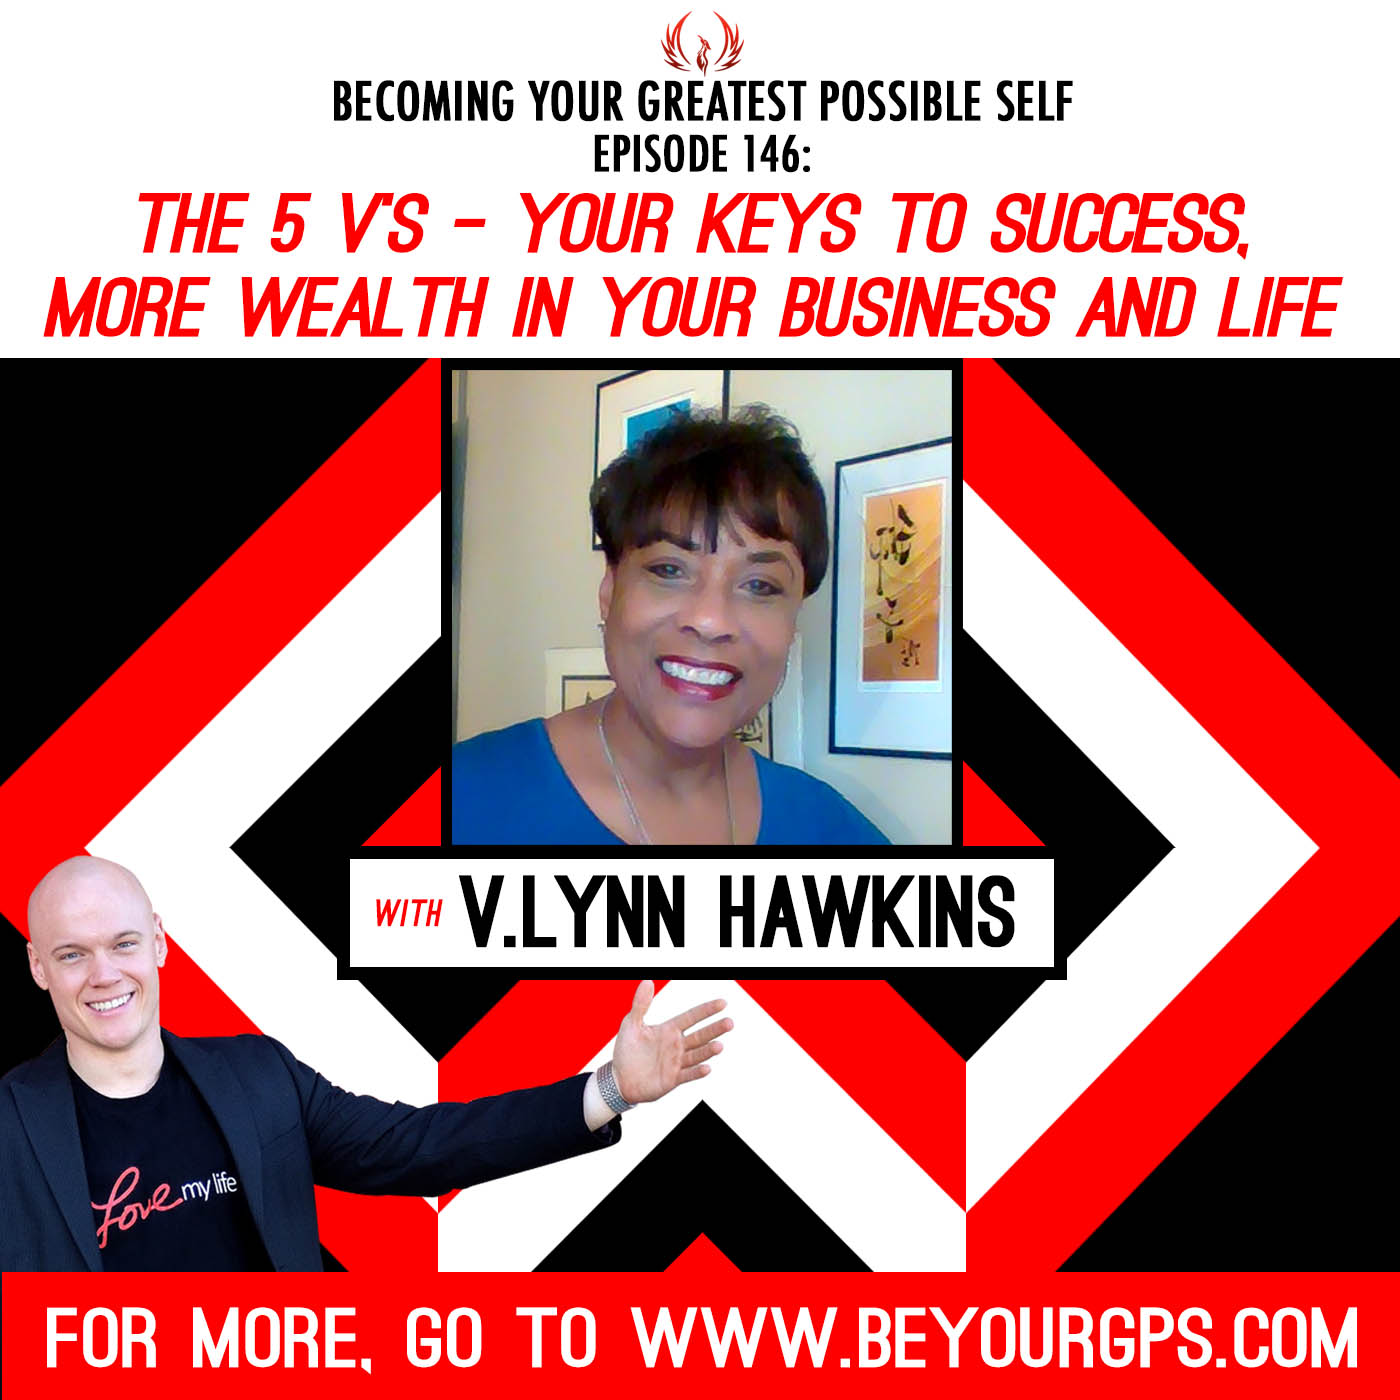 The 5 V's - Your Keys to Success, More Wealth in Your Business and Life with V.Lynn Hawkins